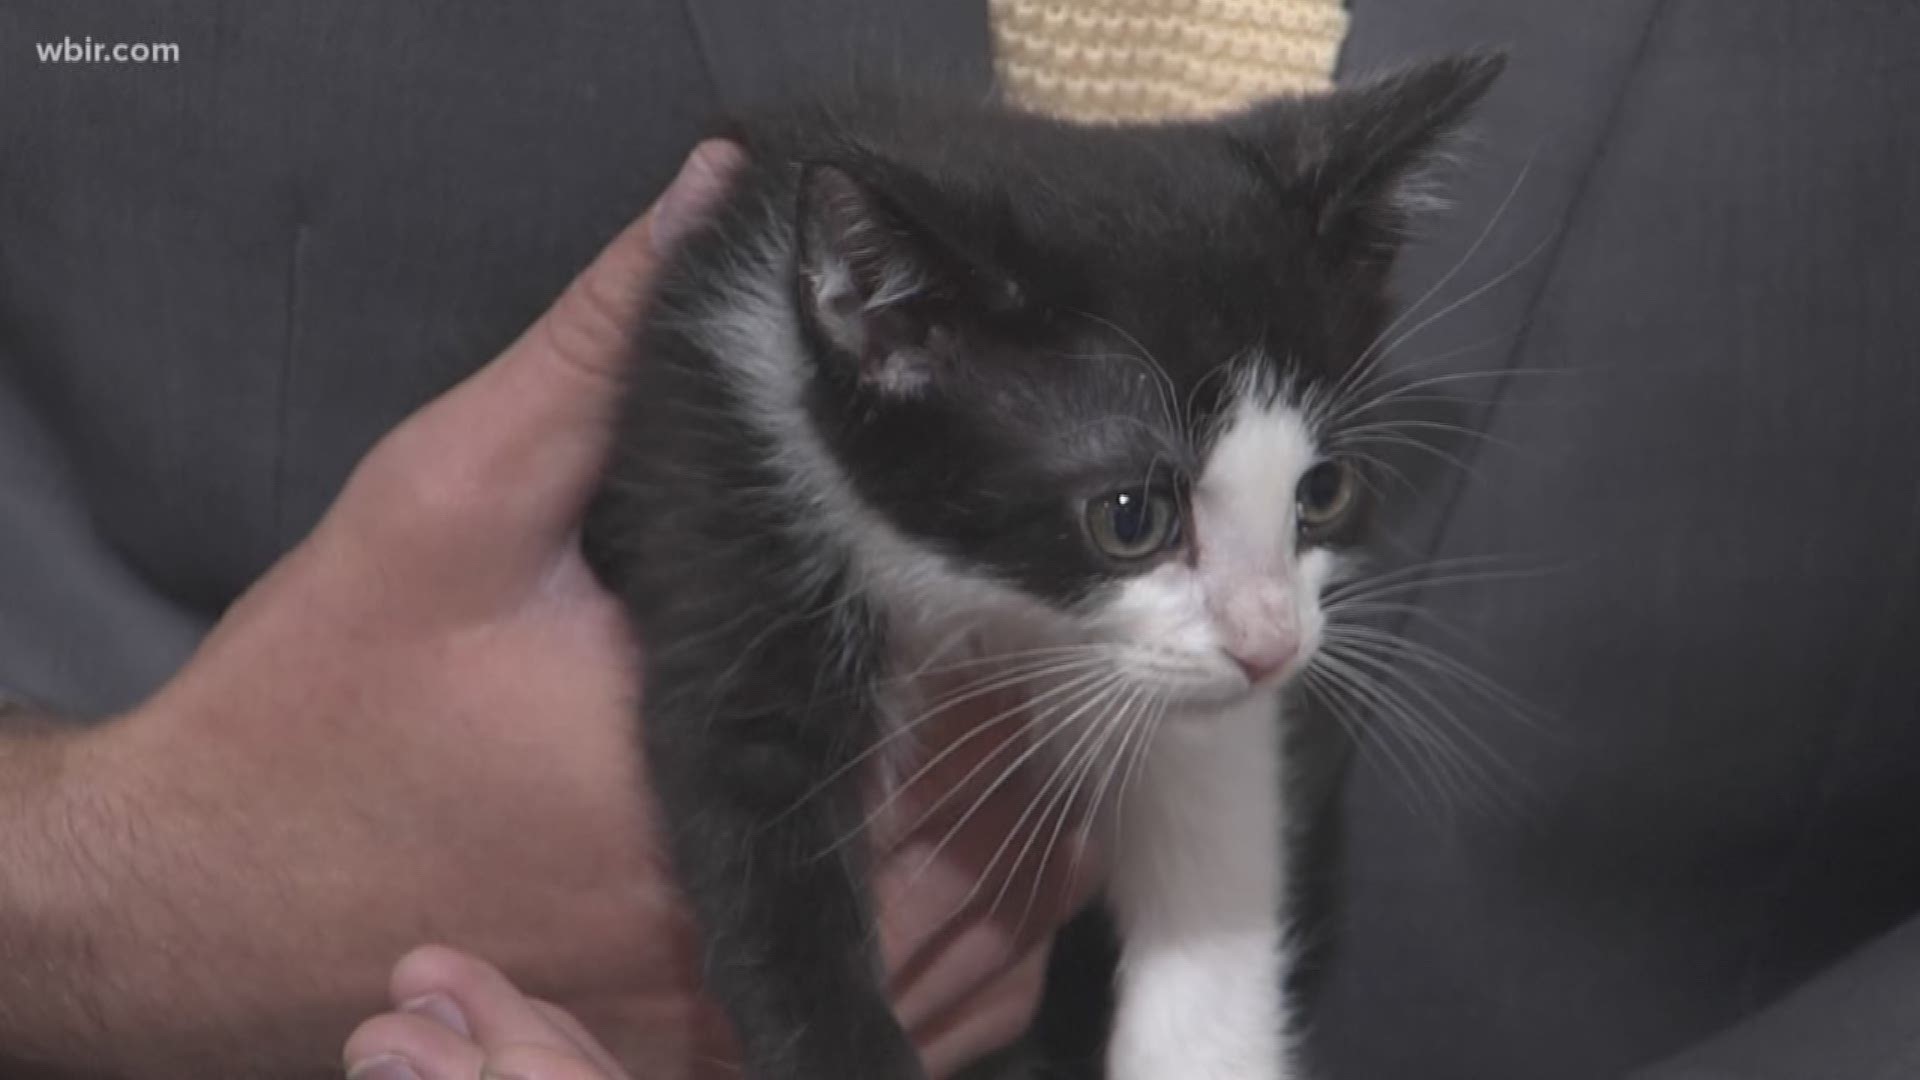 Carmen Shepherd brought three kittens available for adoption soon from Young-Williams Animal Center.